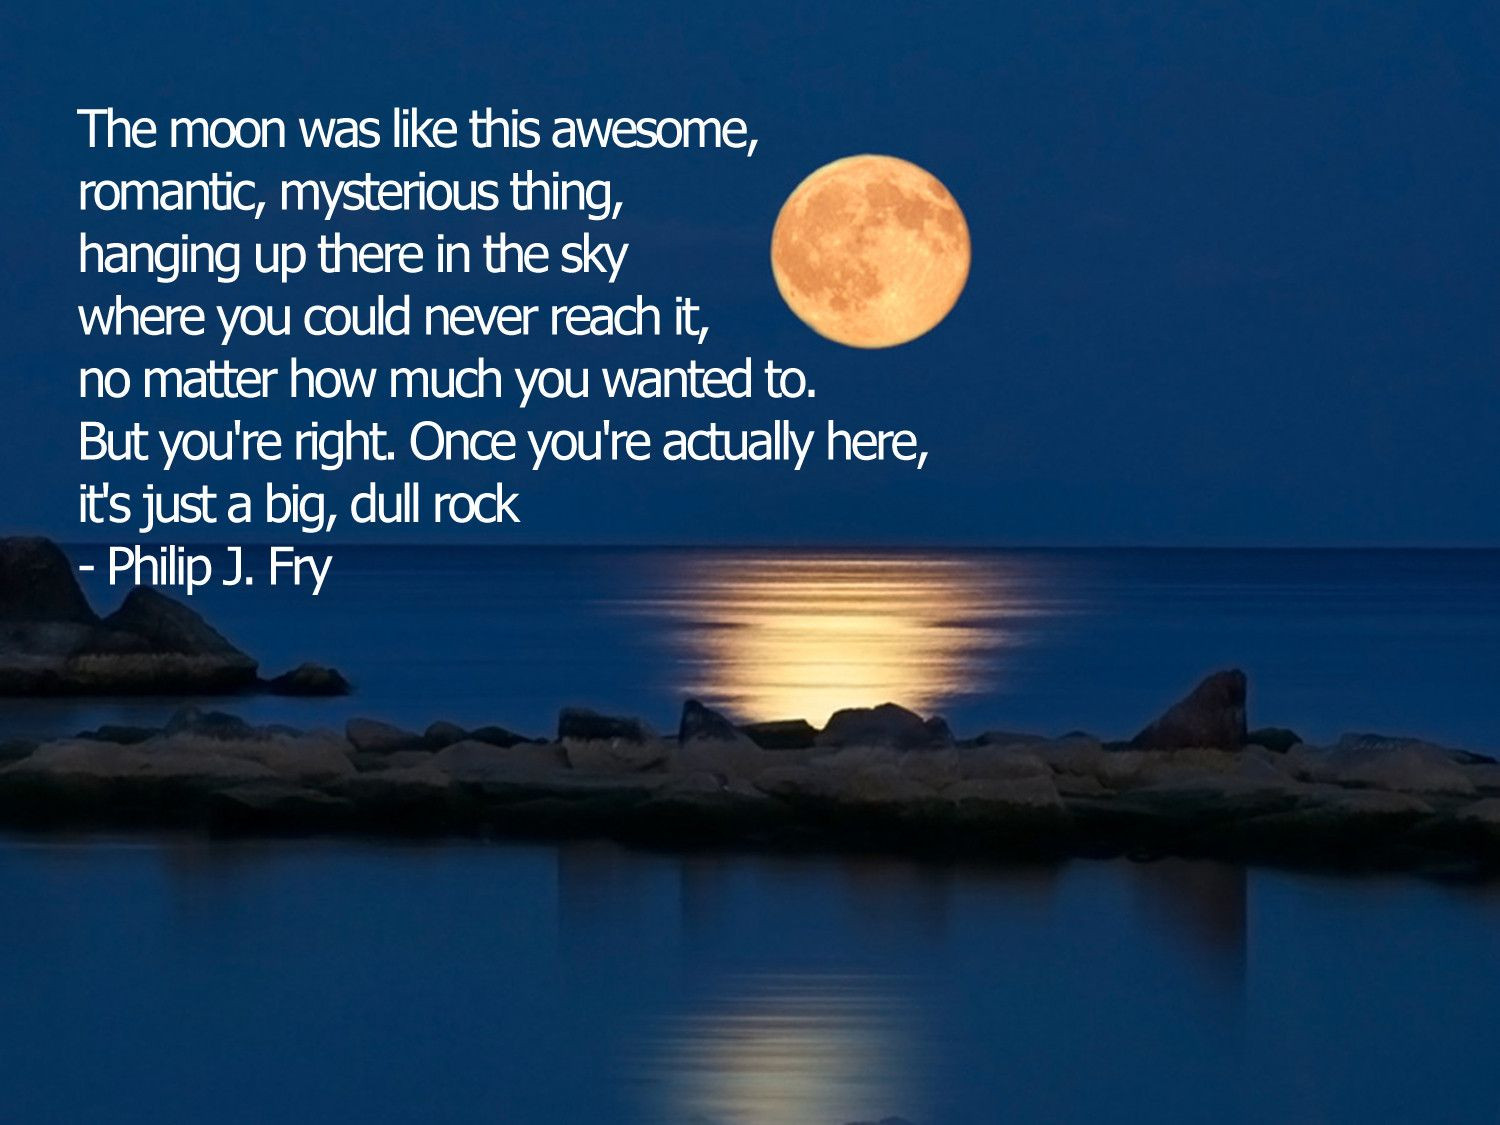 Romantic Moon Quotes
 quotes about the moon The Moon was like this awesome romantic…" – Philip J Fry